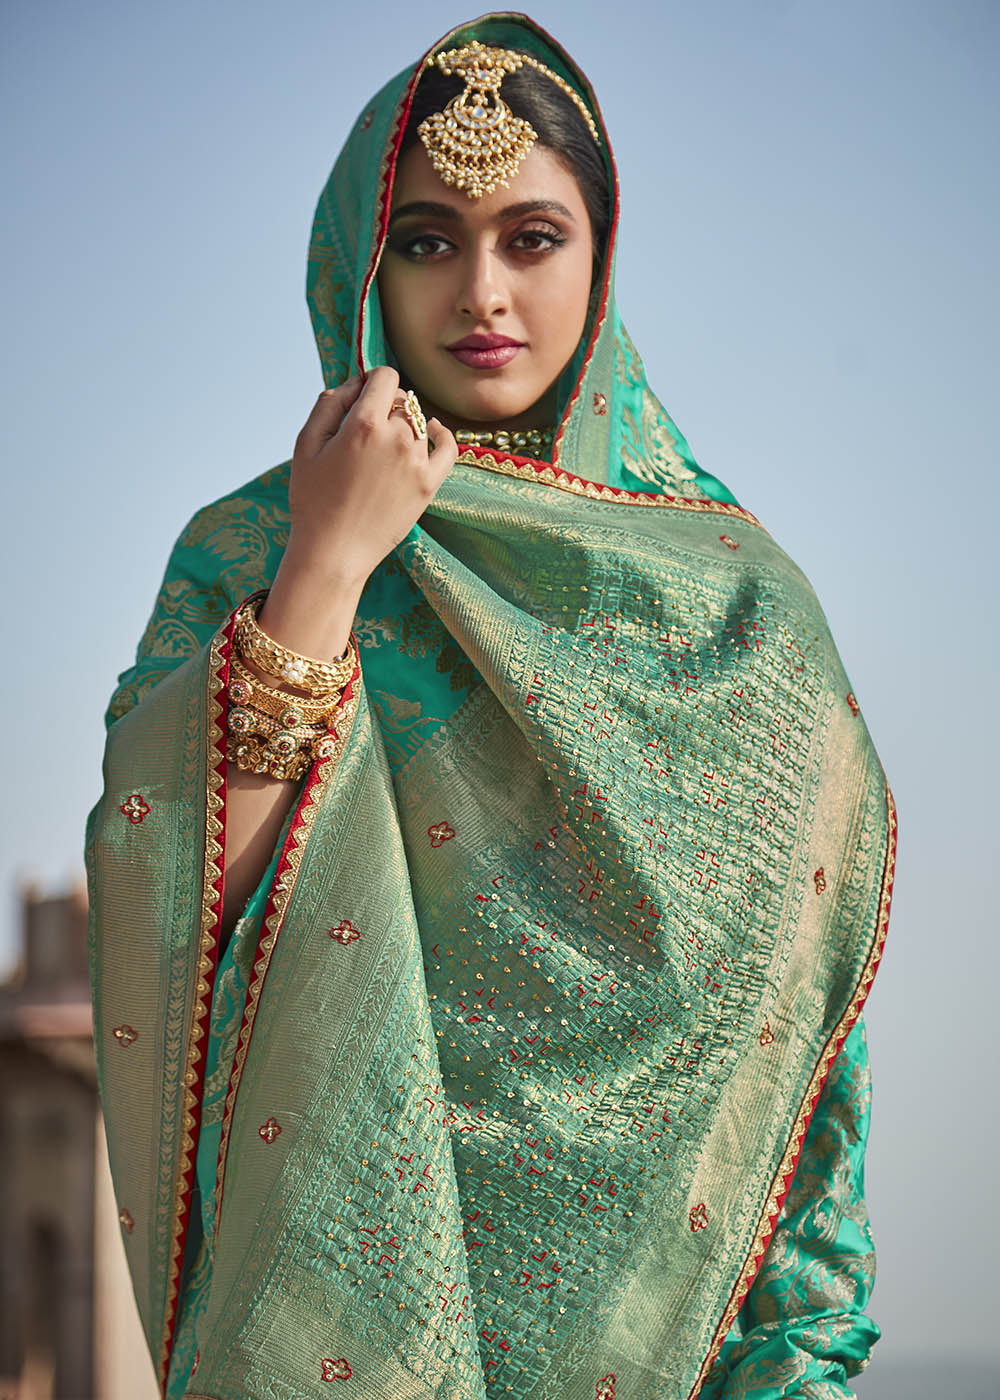 Elegant and Timeless Green Woven Banarasi Silk Saree with Embroidered Blouse